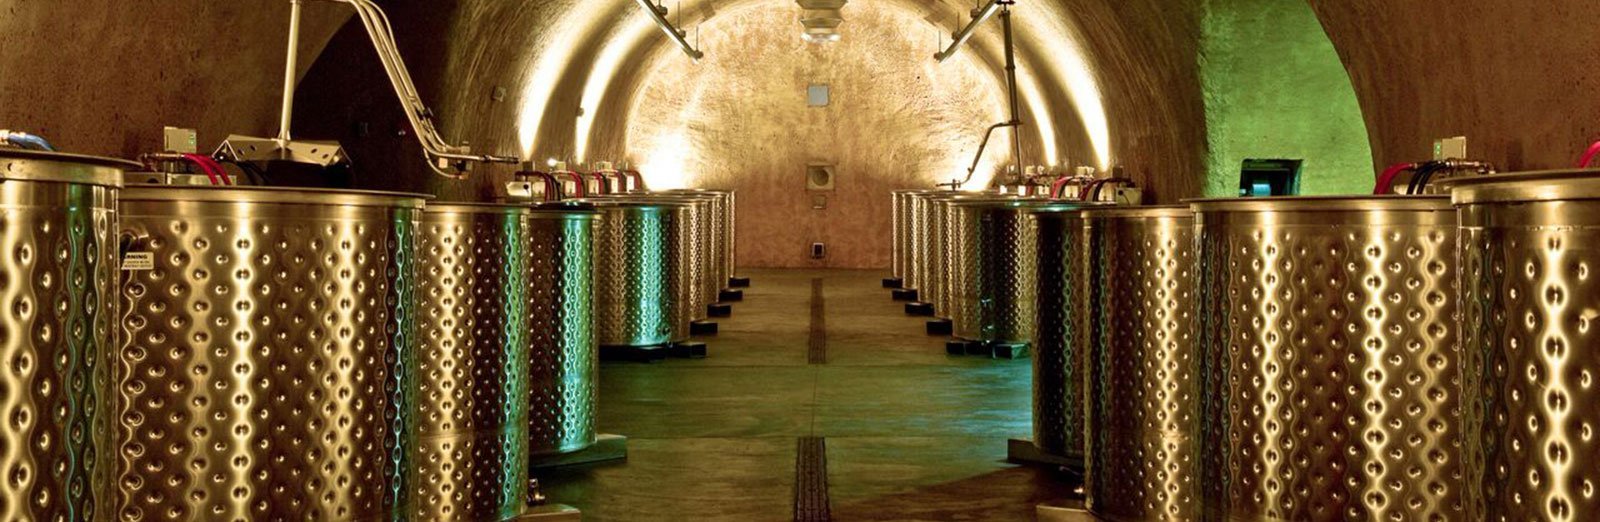 Michigan Tech students chosen for the annual Silicon Valley Experience tour Porter Family Vineyards. Here is the fermentation bay in the 17,000 square-foot underground complex. A 515-foot tunnel leads from one side of the mountain to the other.